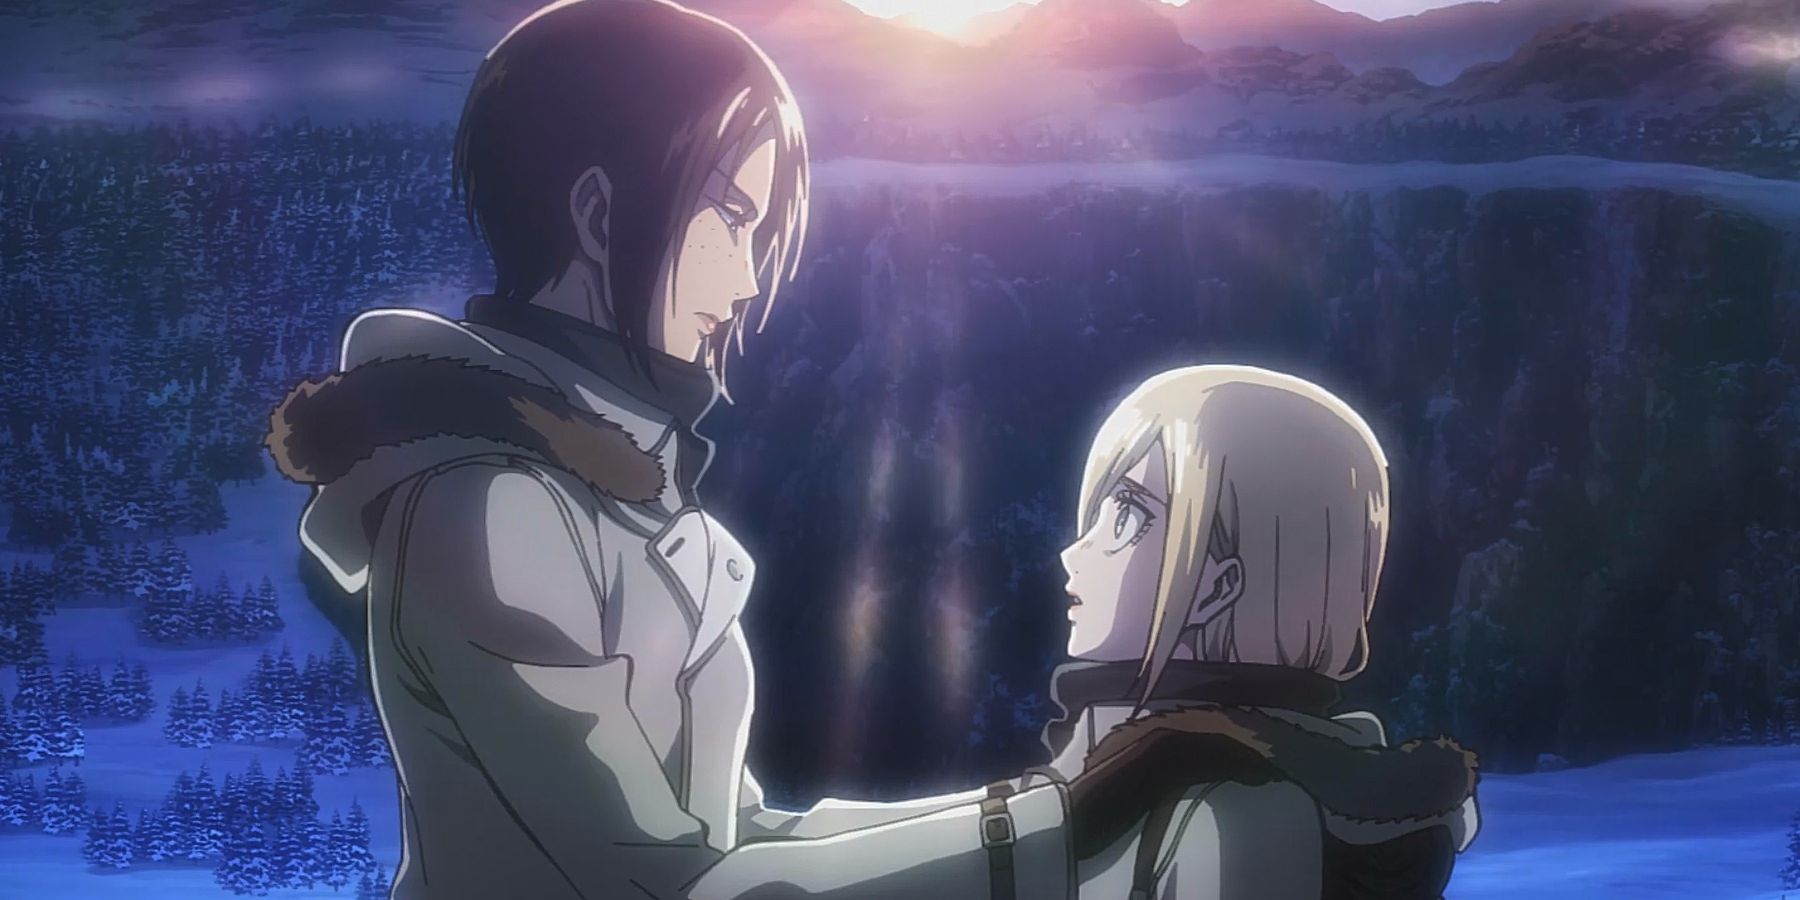 Historia and Ymir